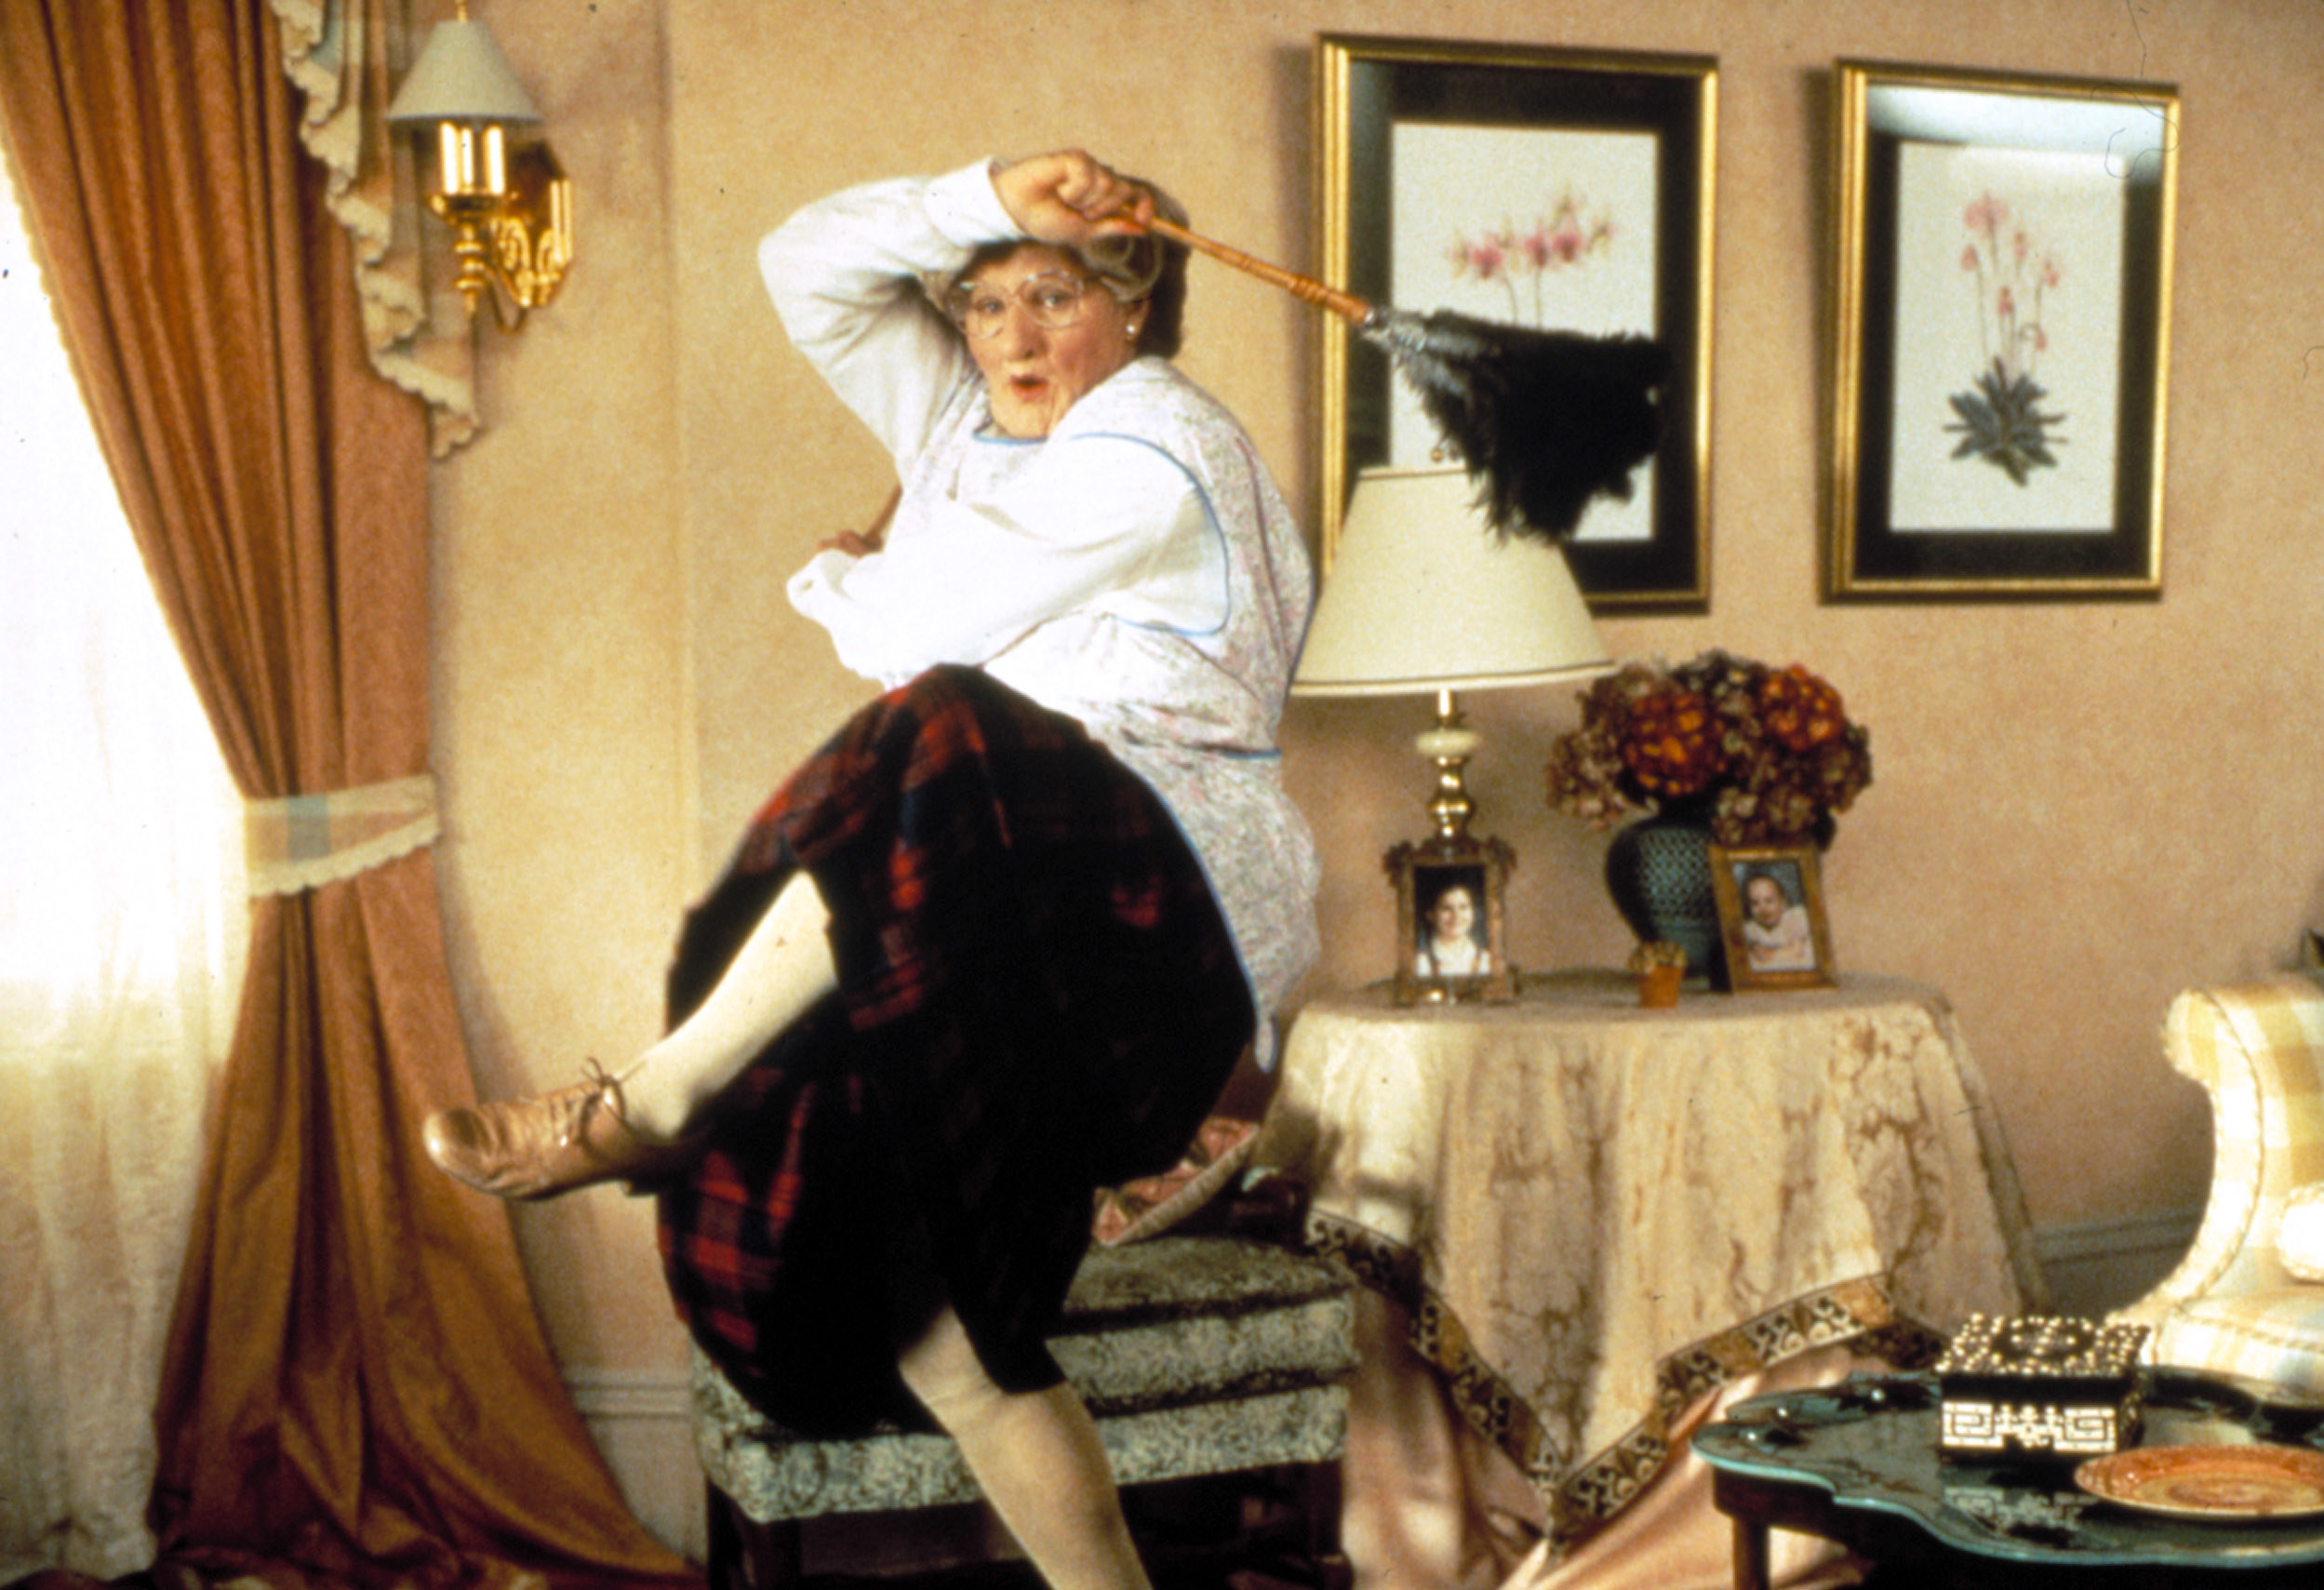 Robin Williams dressed as Mrs. Doubtfire dances in a living room